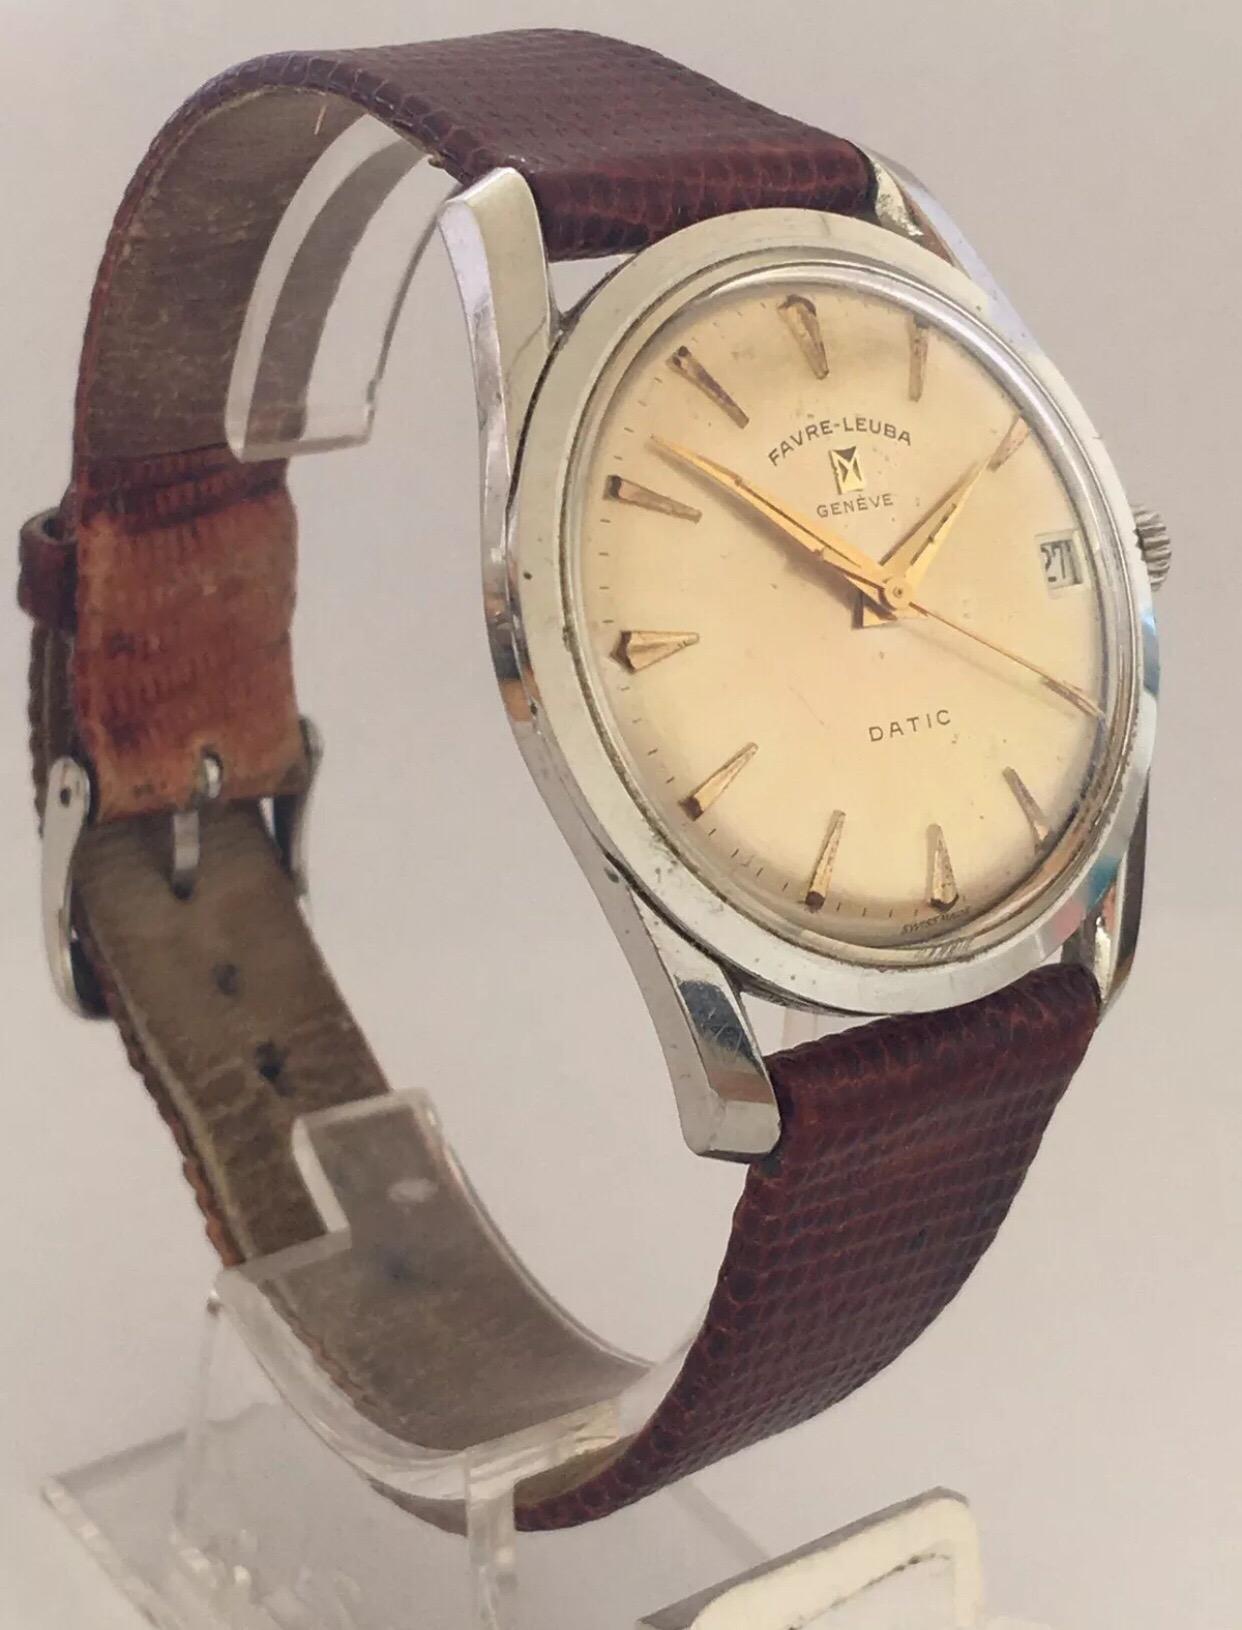 
1960s Vintage Manual Fabre-Leuba Geneve Datic.

This watch is working and ticking well. The strap is a bit worn.